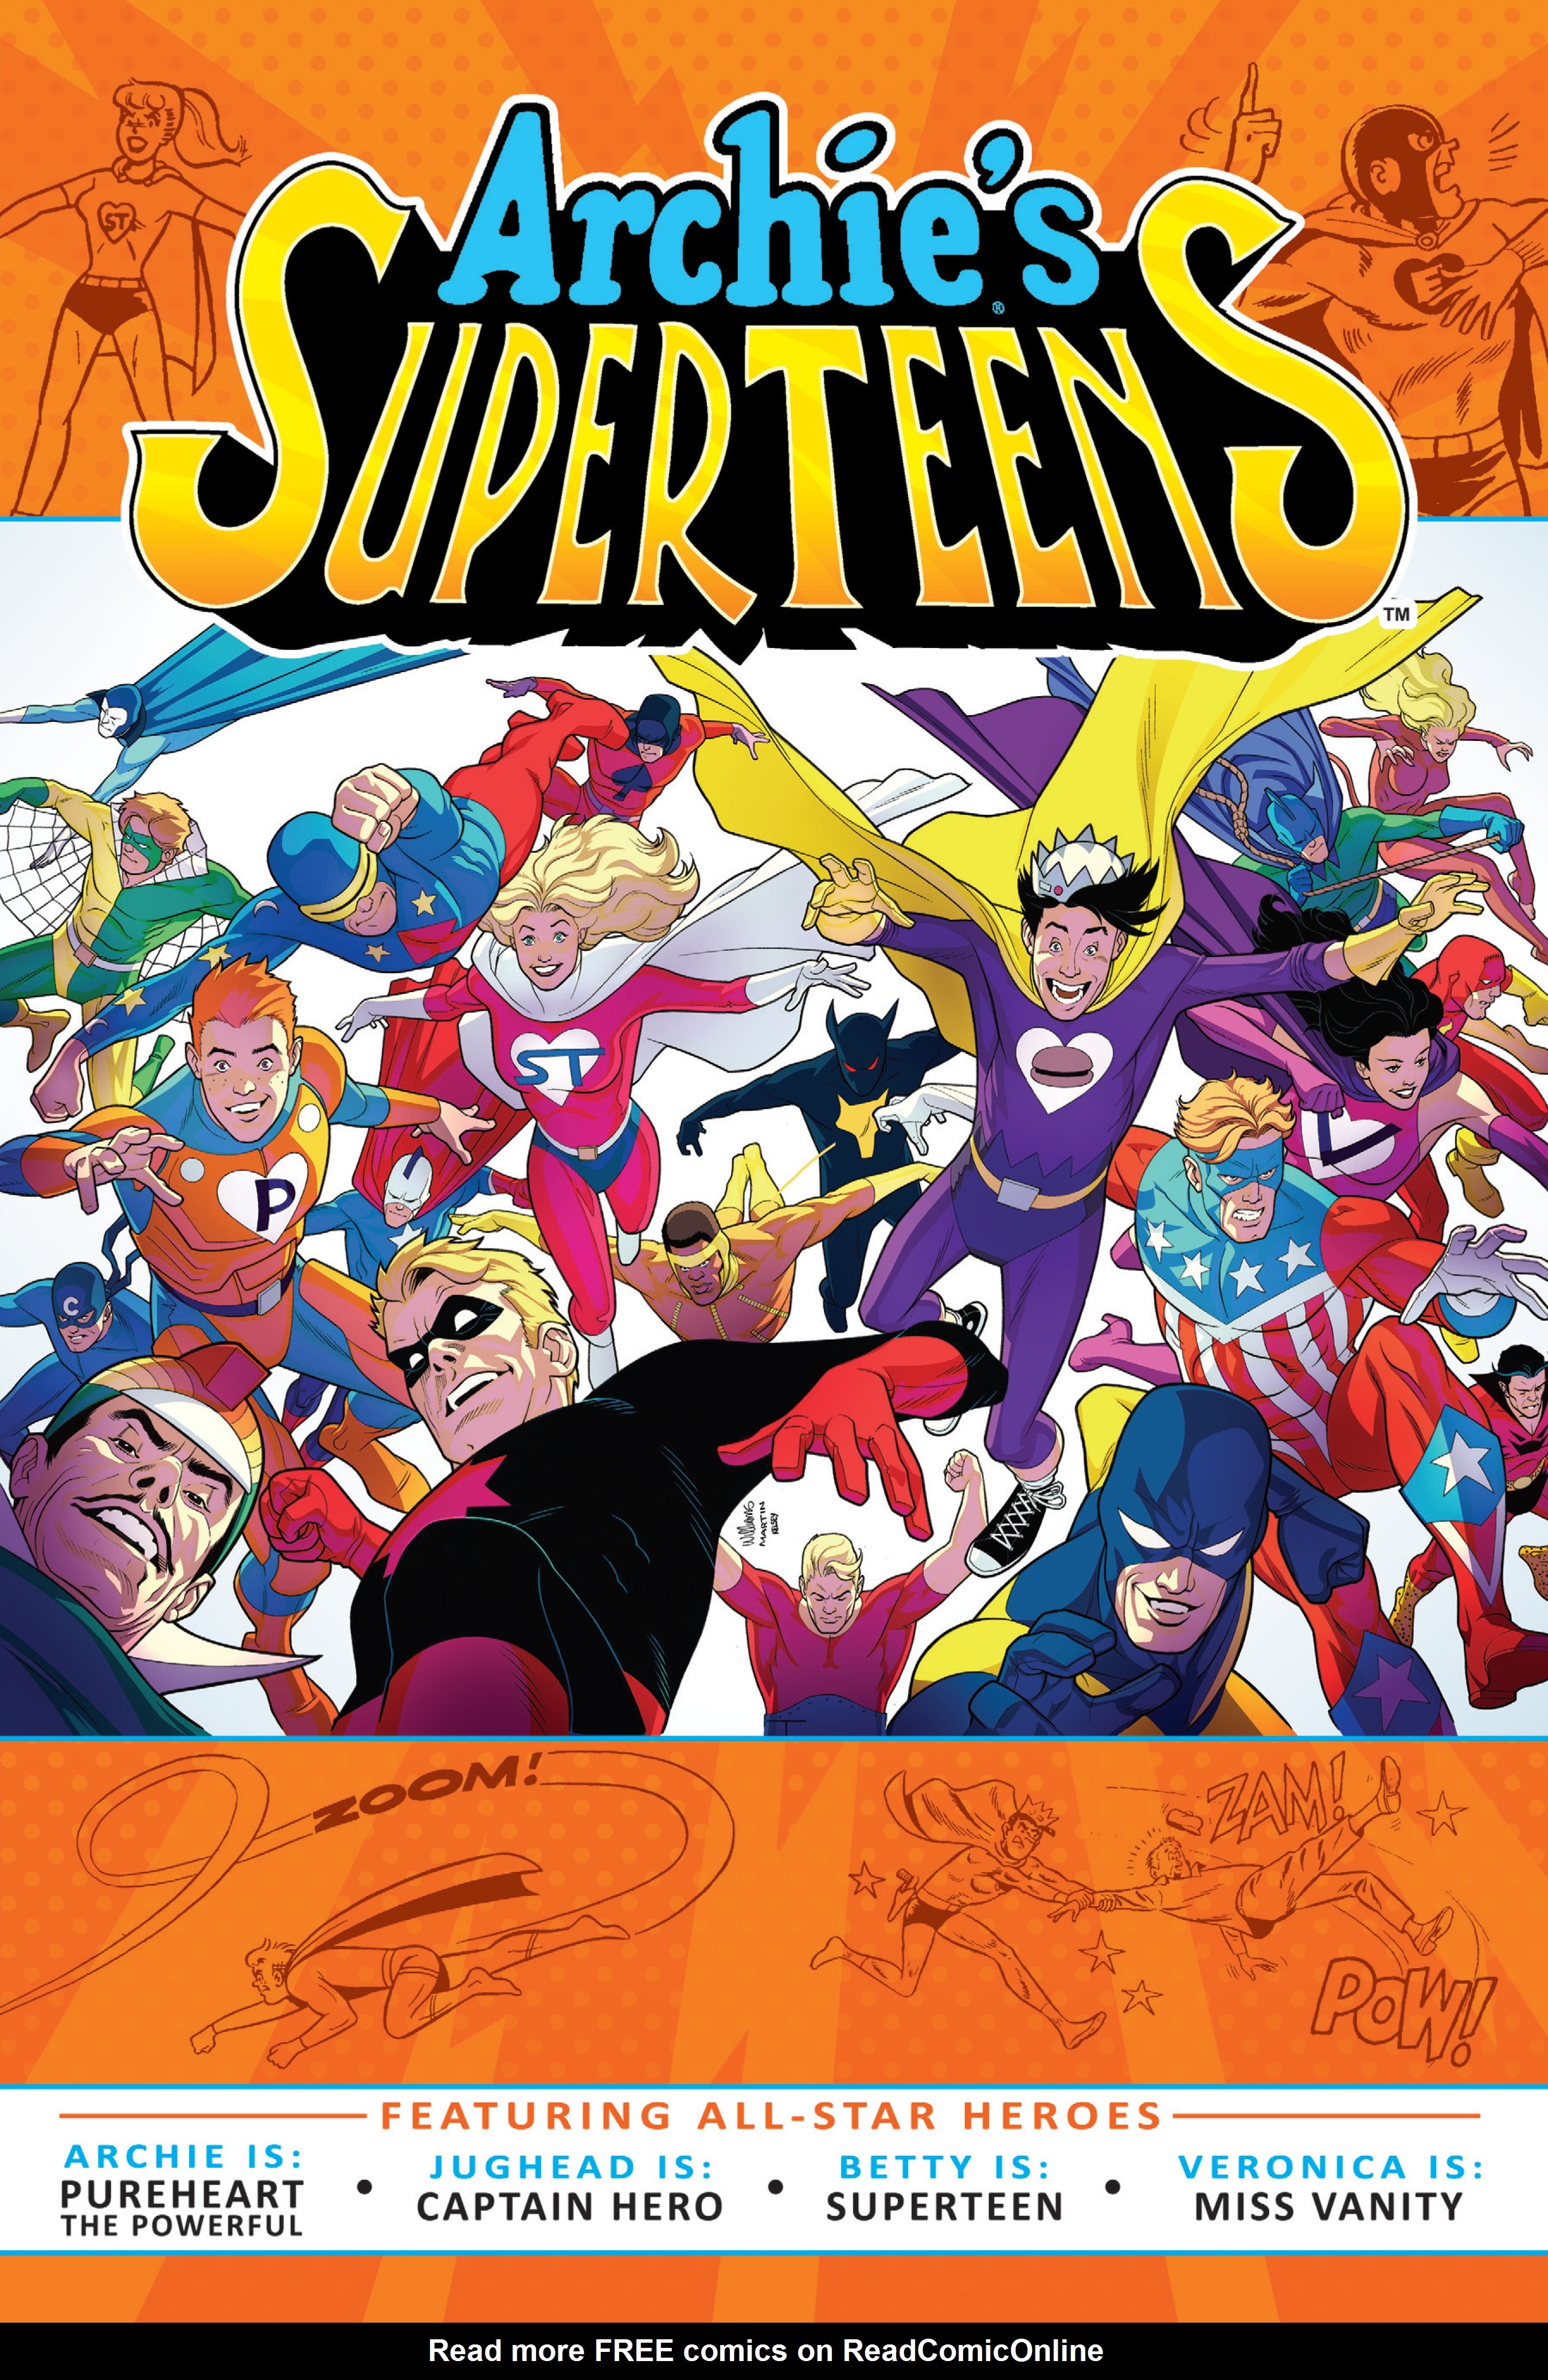 Read online Archie's Superteens comic -  Issue # TPB - 1